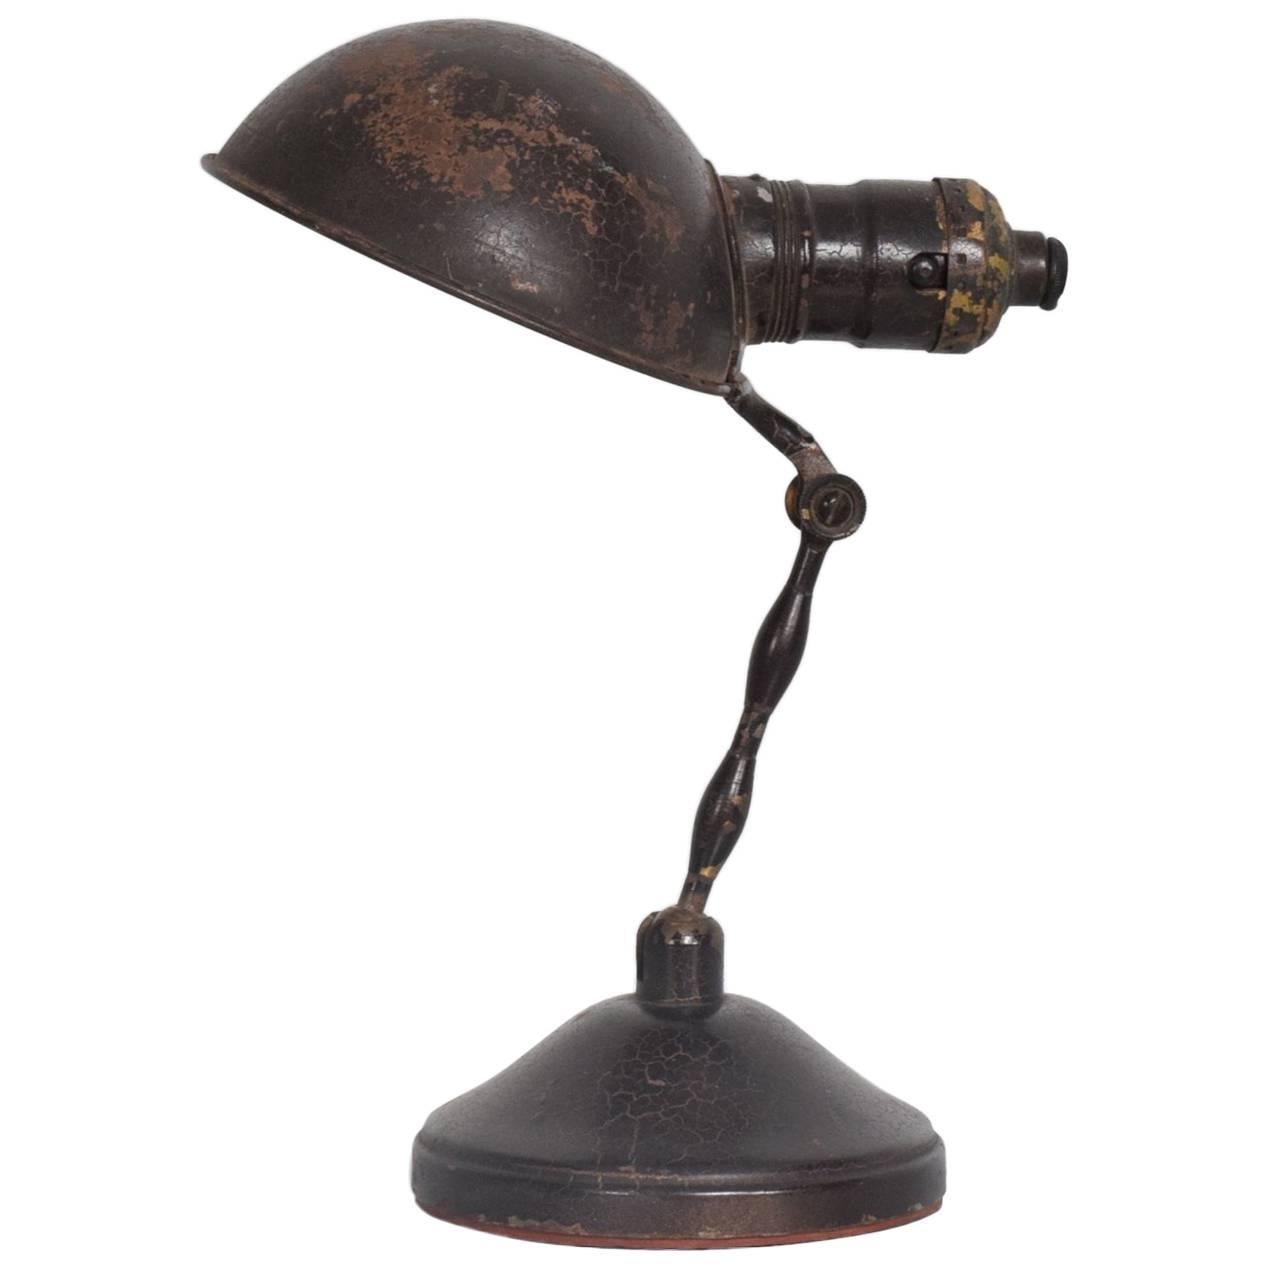 Industrial Desk or Wall Sconce Lamp, Mid-Century Period